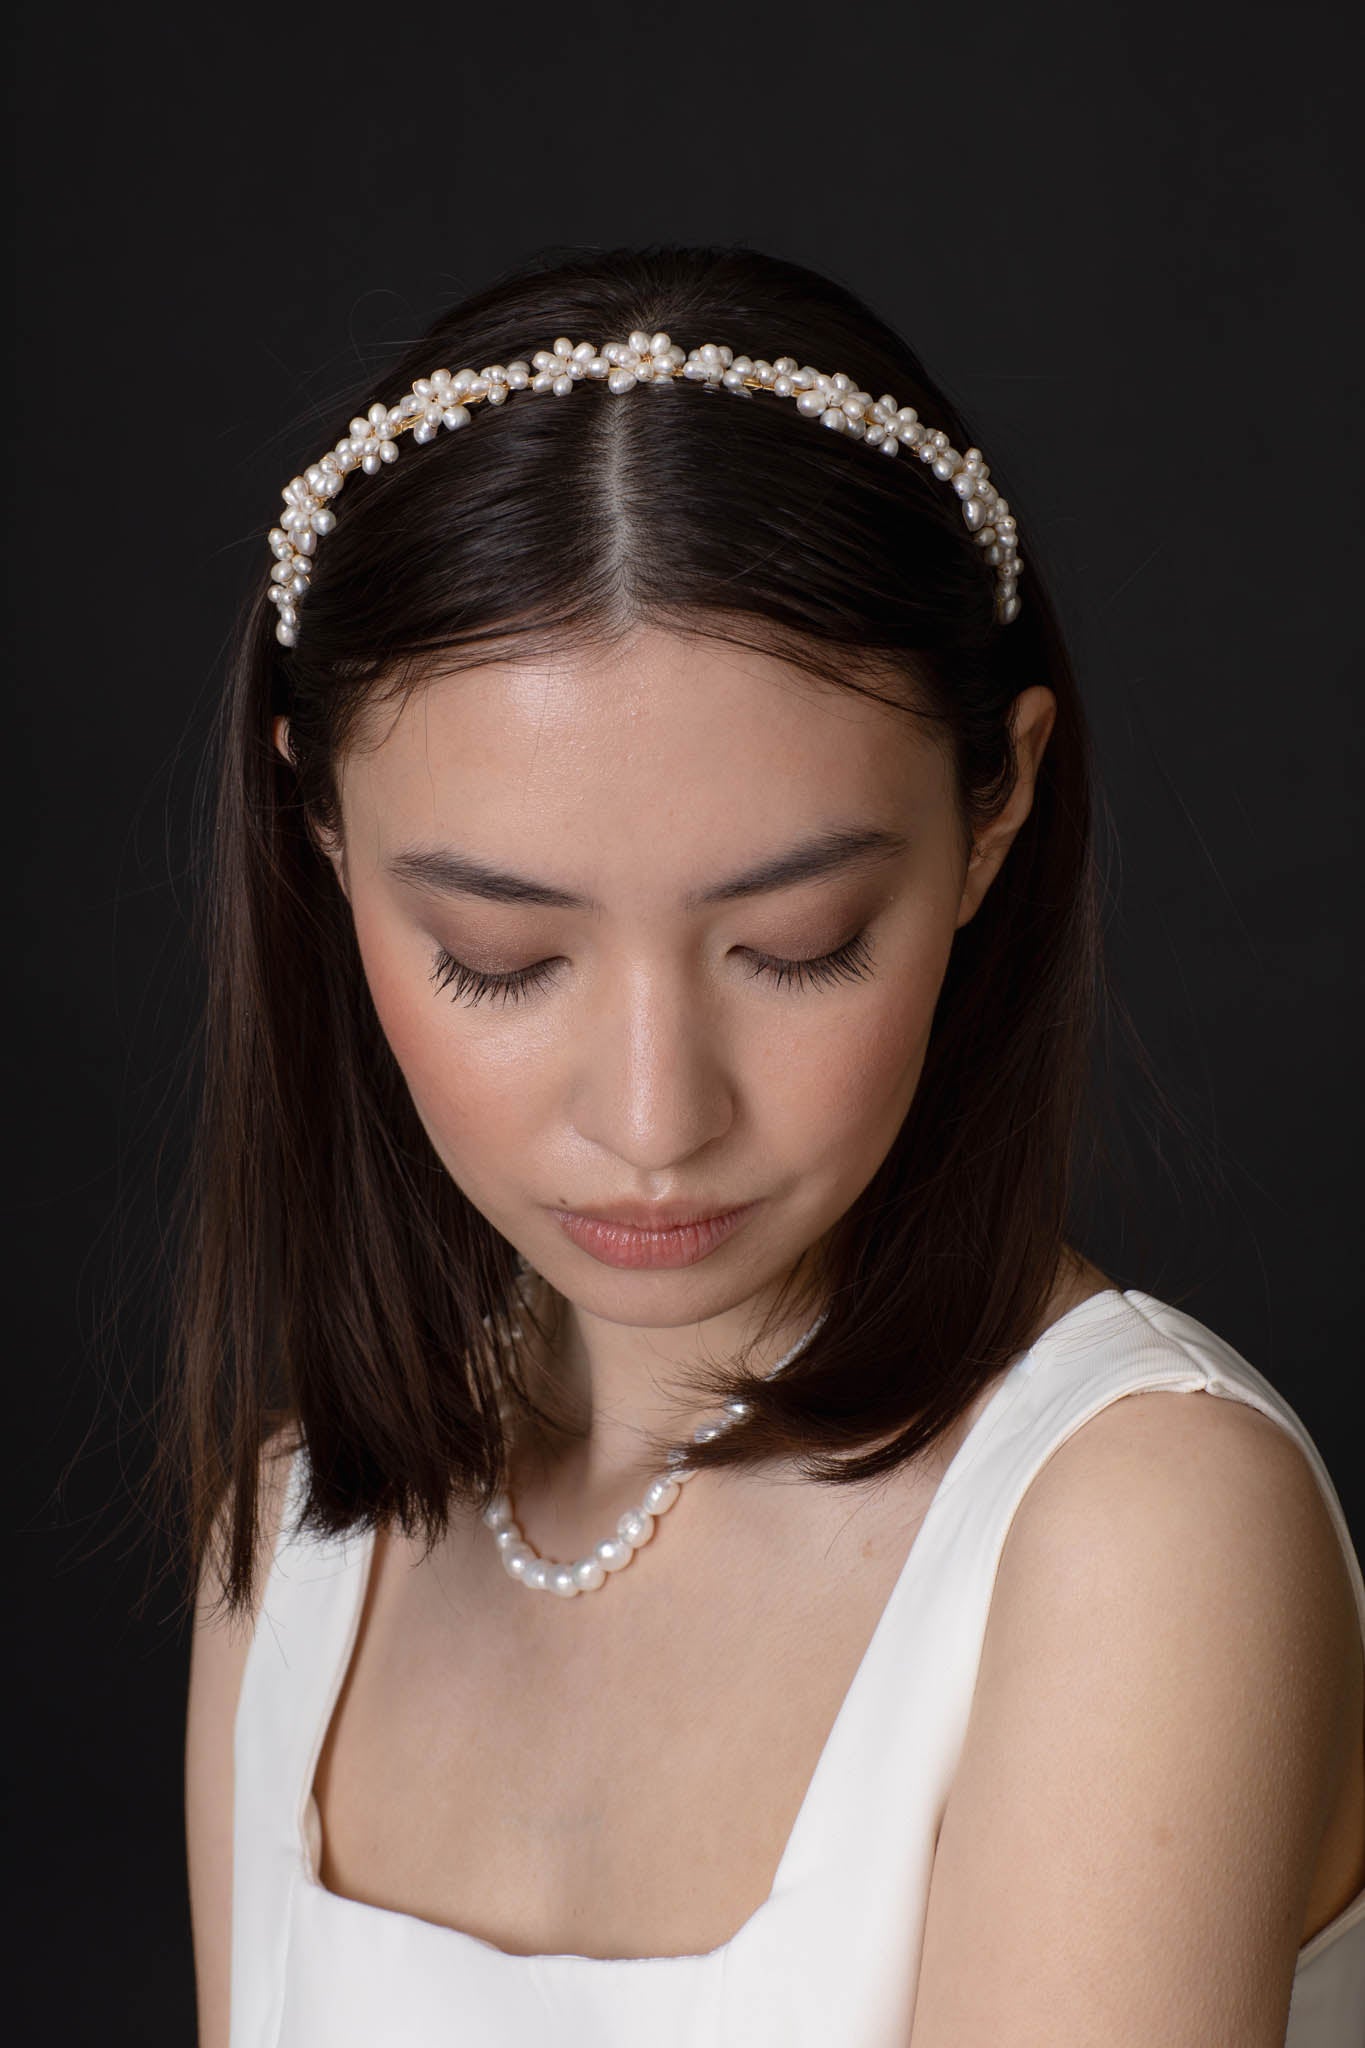 Sophisticated and dreamy pearl headband will compliment any bridal look. Look like a goddess walking down the aisle with light shimmering off each individual pearl.